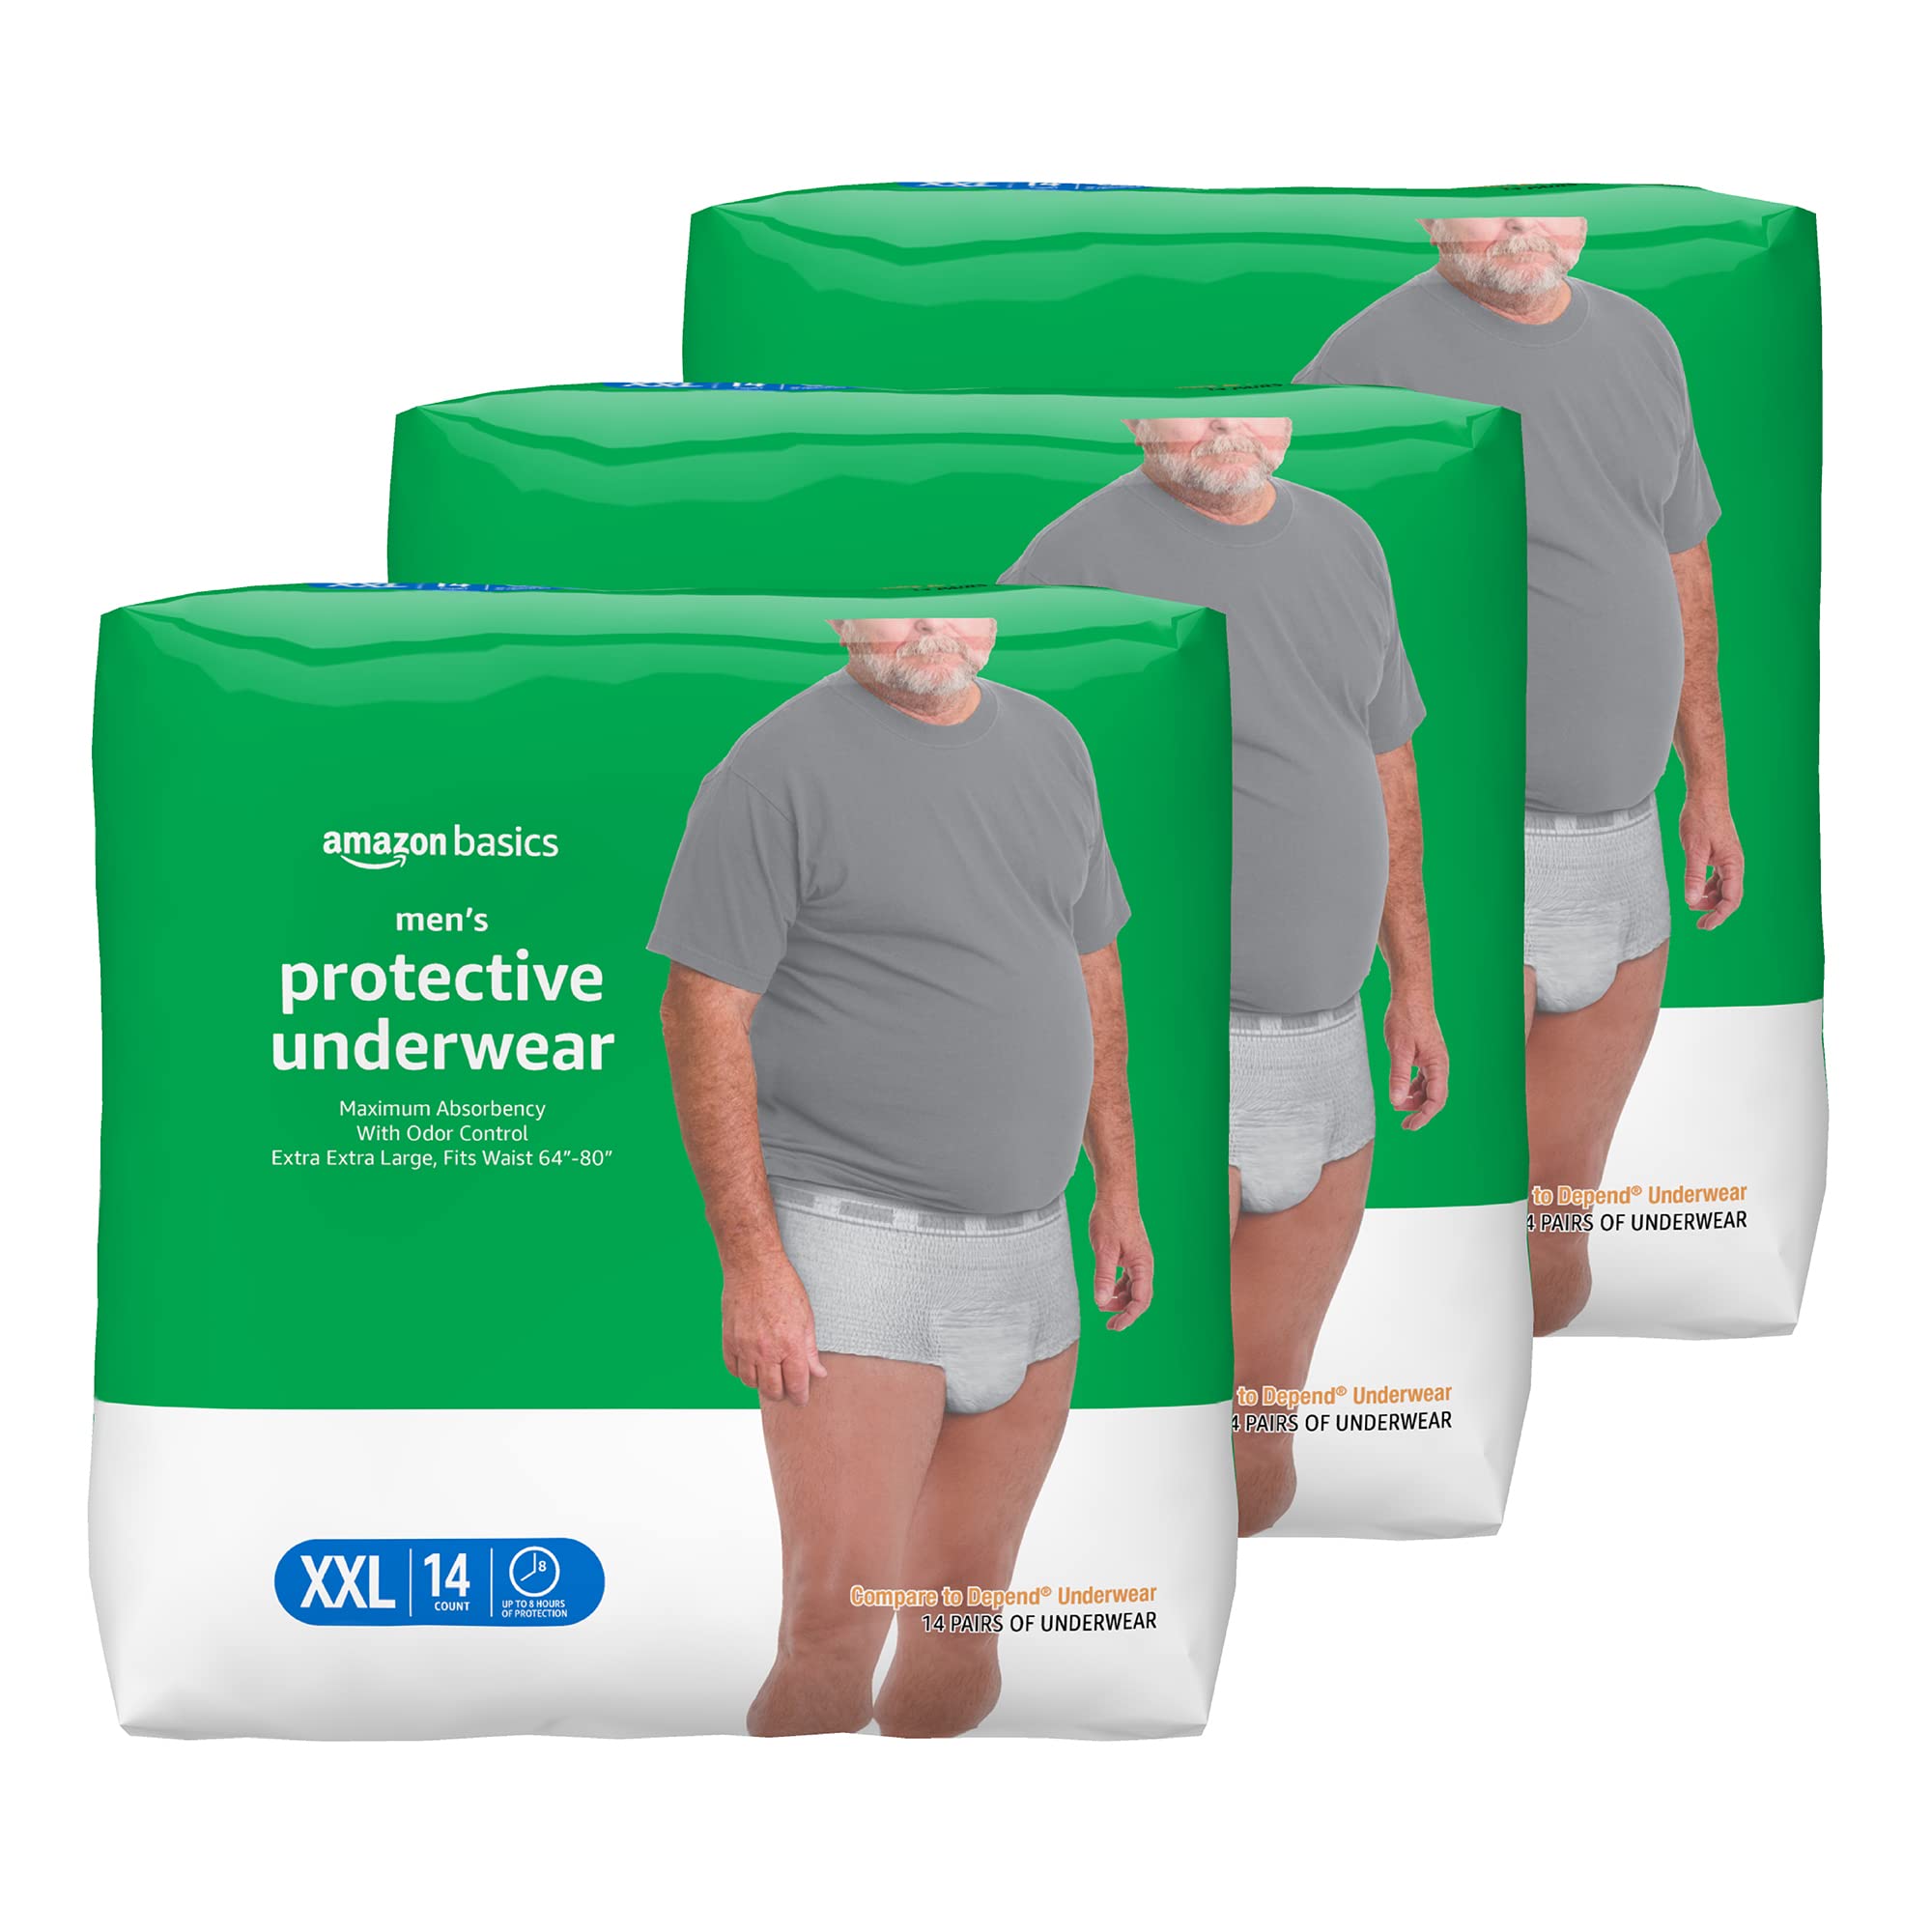 Depend Fit-Flex Extra Large Underwear for Men, Maximum Absorbency, 80 ct.